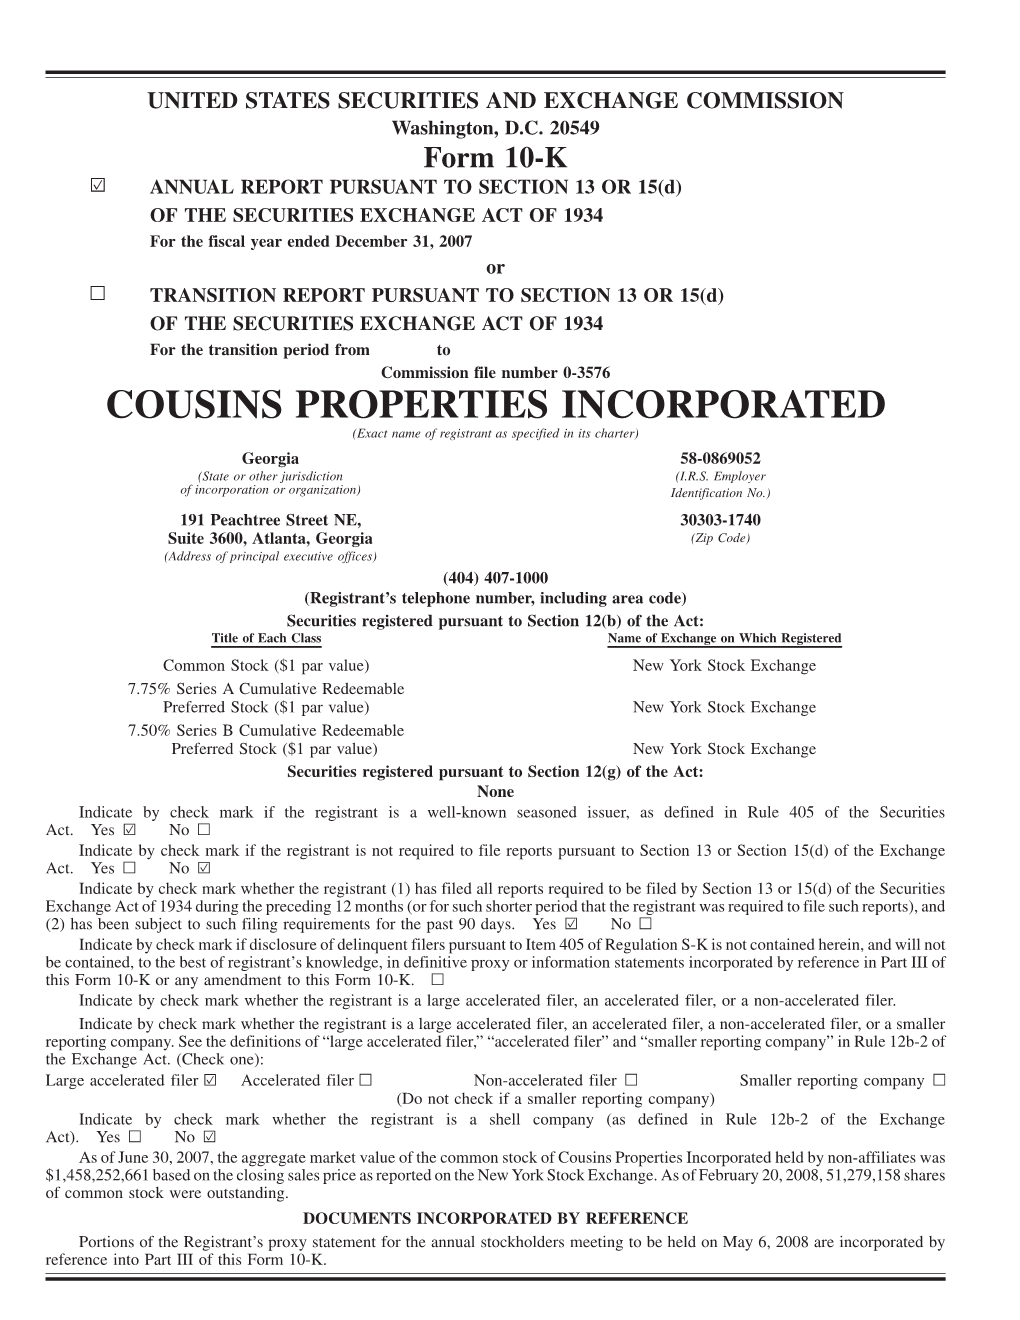 COUSINS PROPERTIES INCORPORATED (Exact Name of Registrant As Specified in Its Charter) Georgia 58-0869052 (State Or Other Jurisdiction (I.R.S